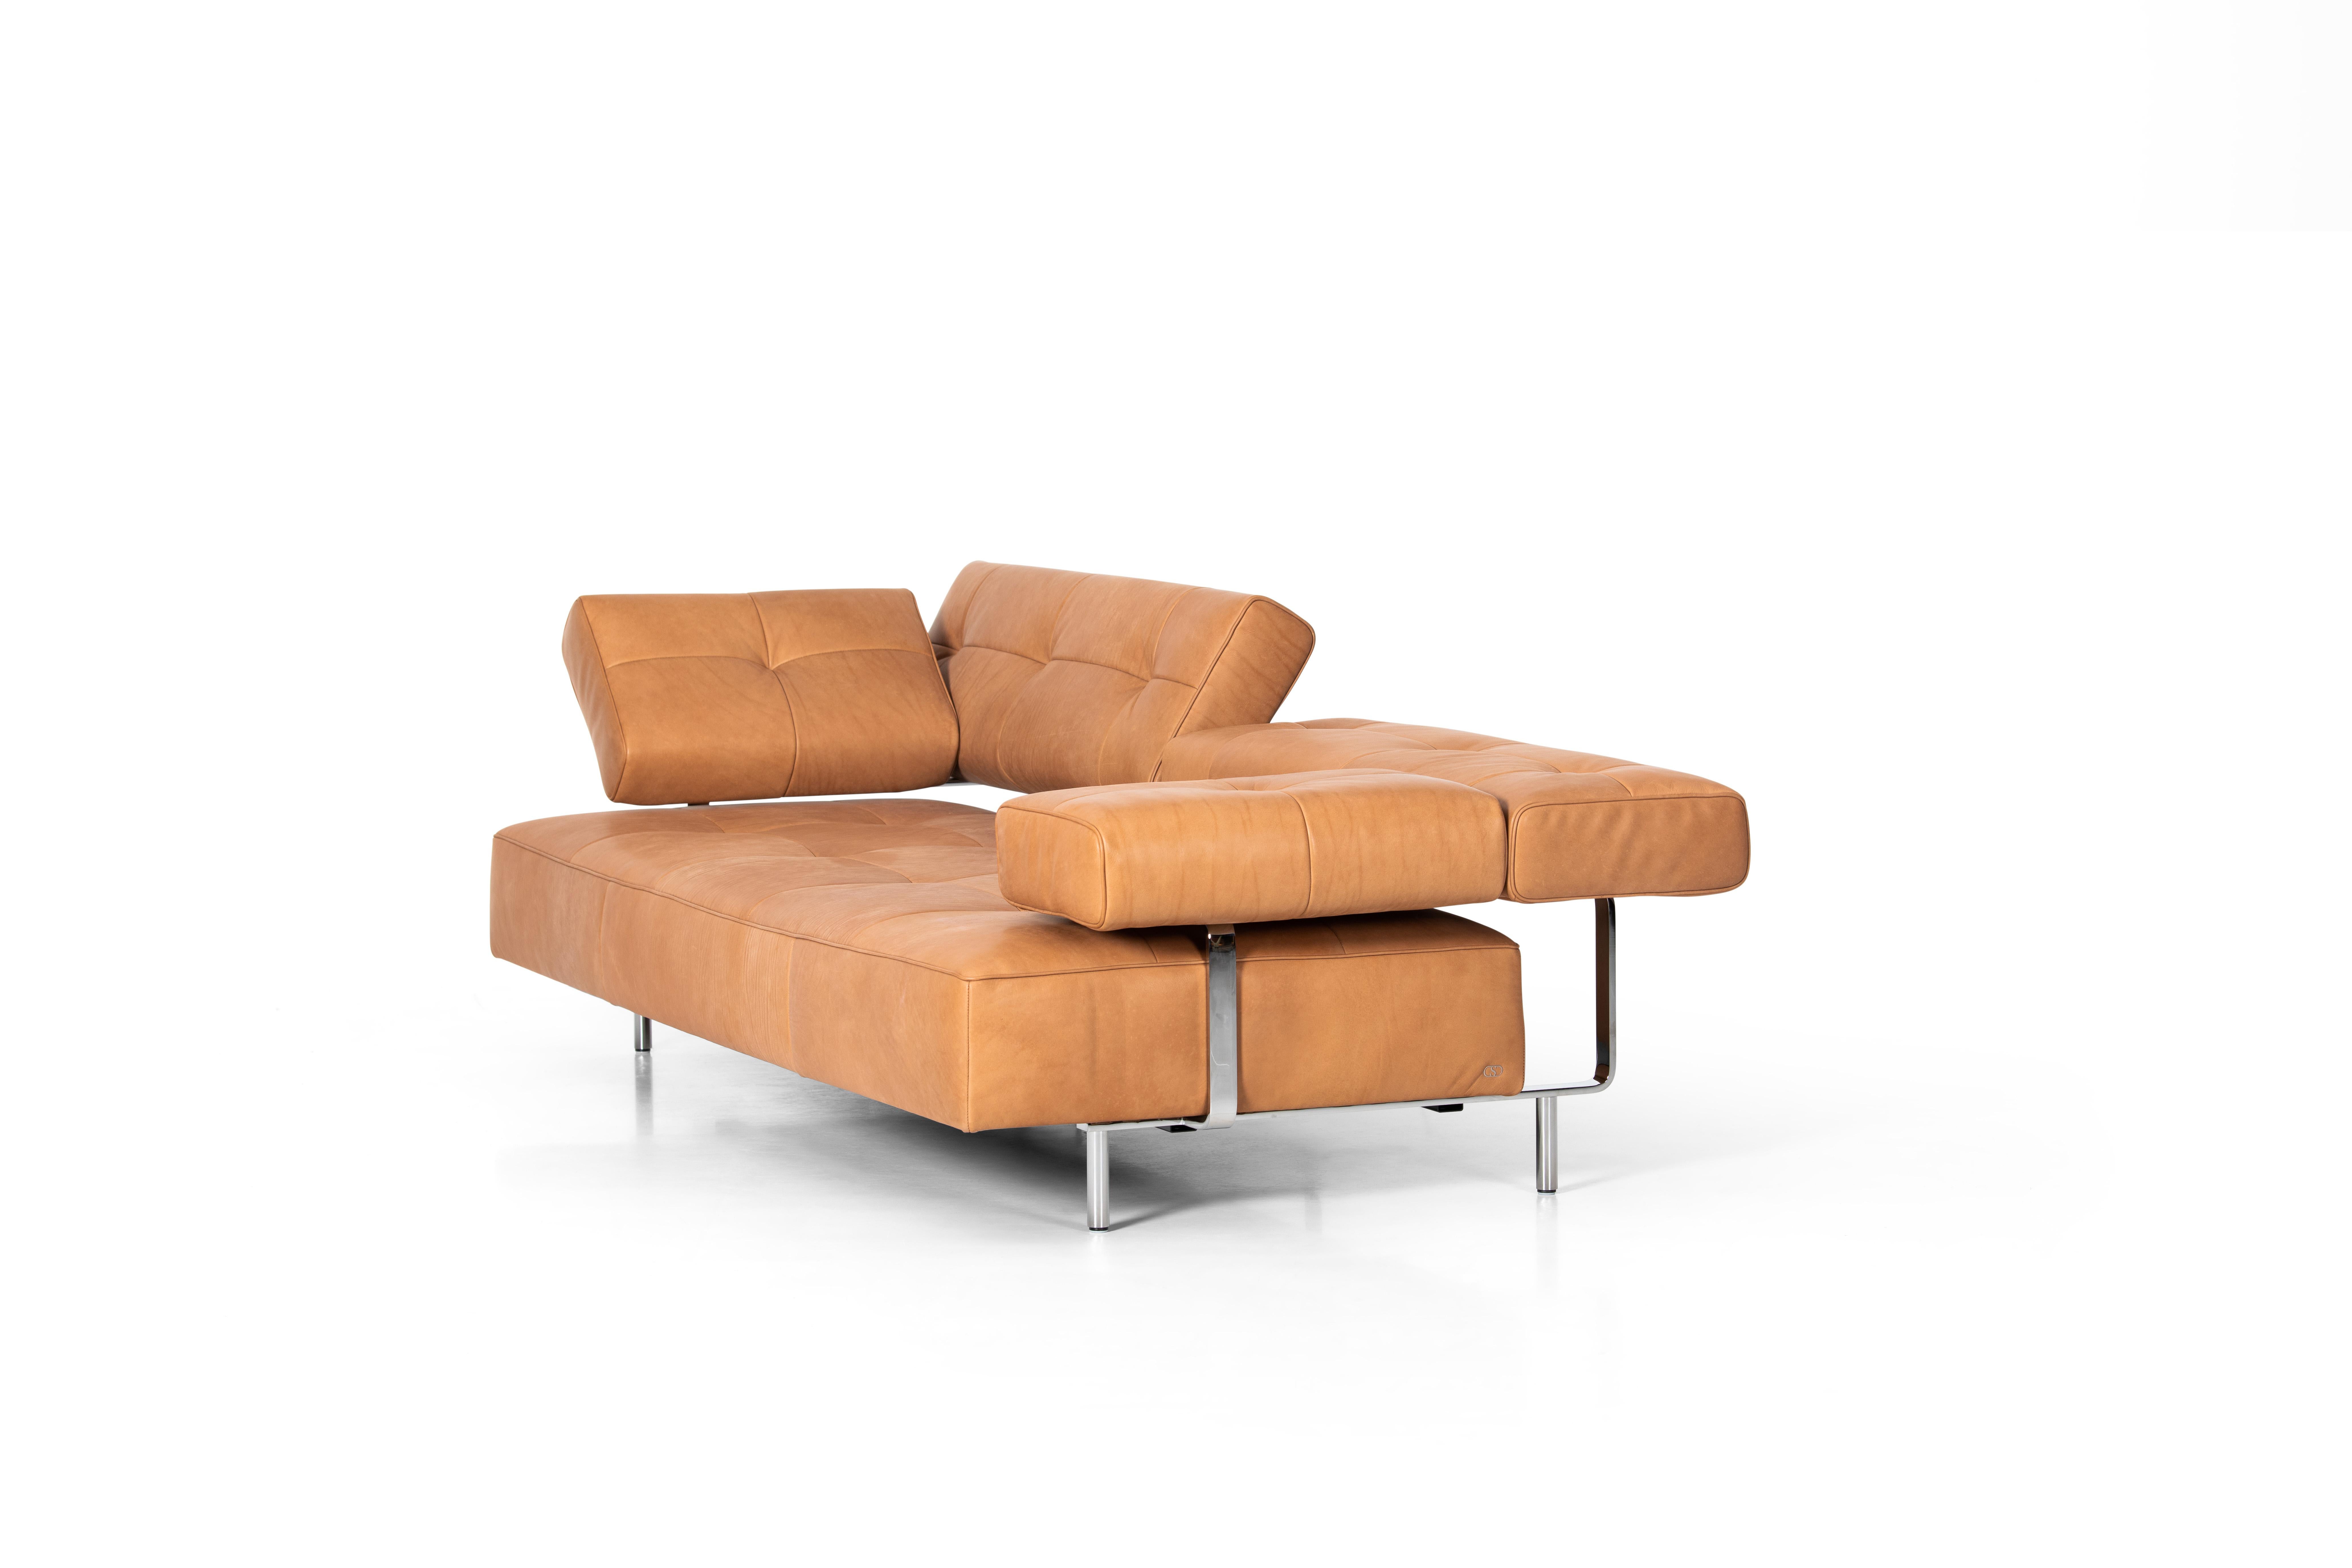 Modern De Sede DS-880/23 Comfortable Sofa in Cuoio Leather Seat and Back Upholstery For Sale